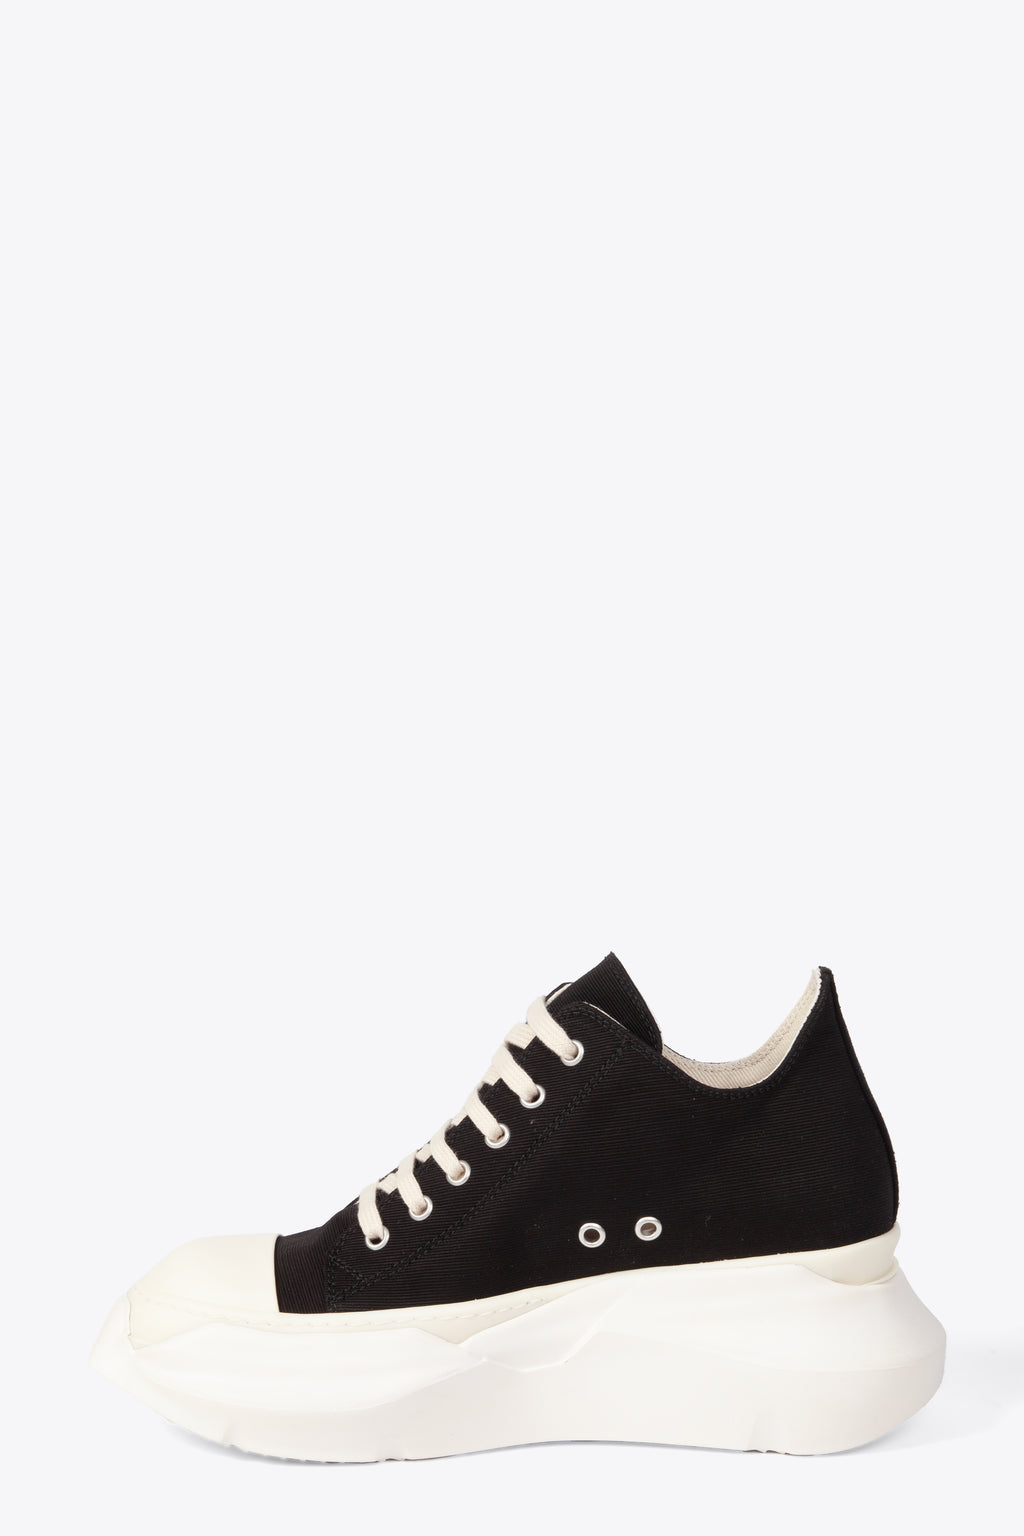 alt-image__Sneaker-bassa-nera-in-cotone-con-suola-Abstract---Abstract-Low-Sneaks